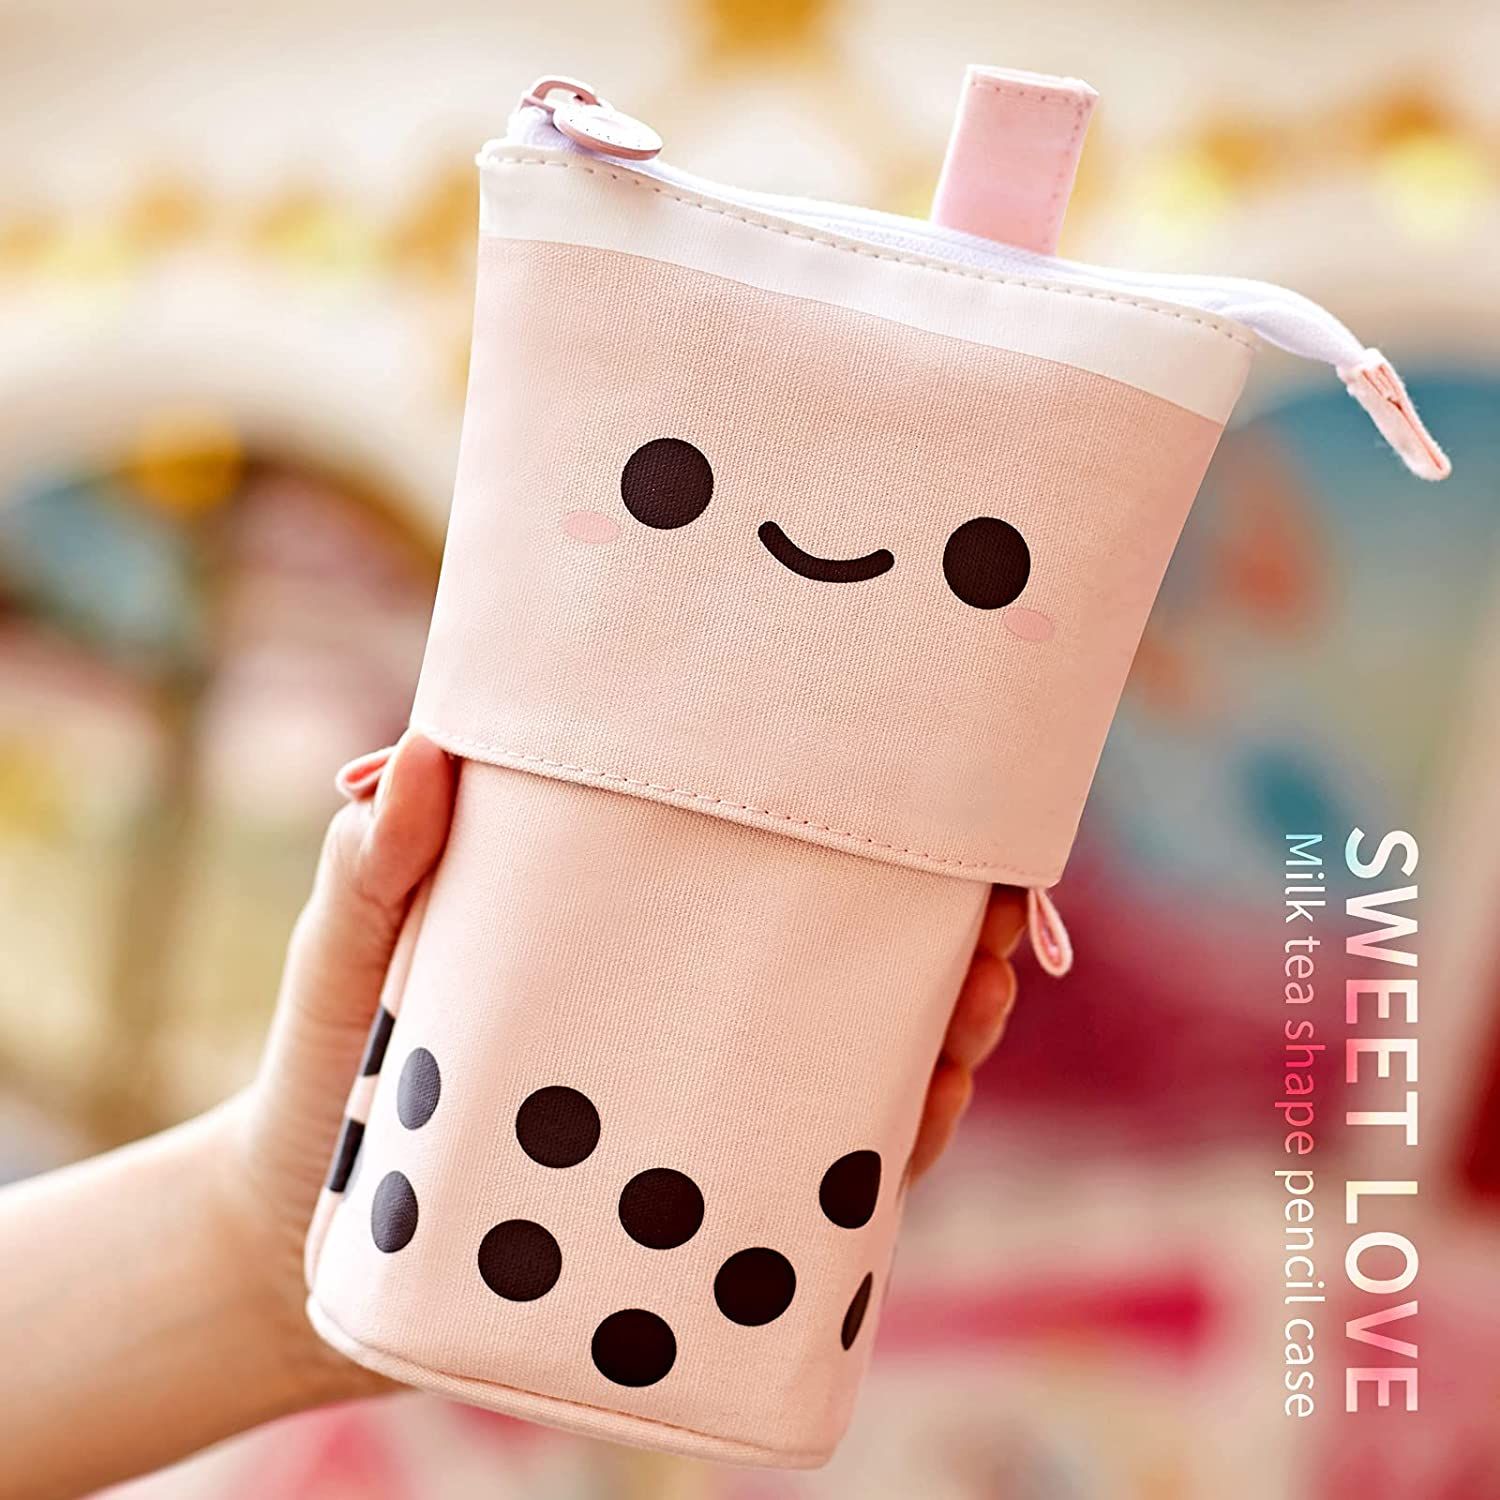 Home & Stuff Cute Telescopic Standing Design Pen Holder Pencil Case Stationery Can Be Pouch Gadget T